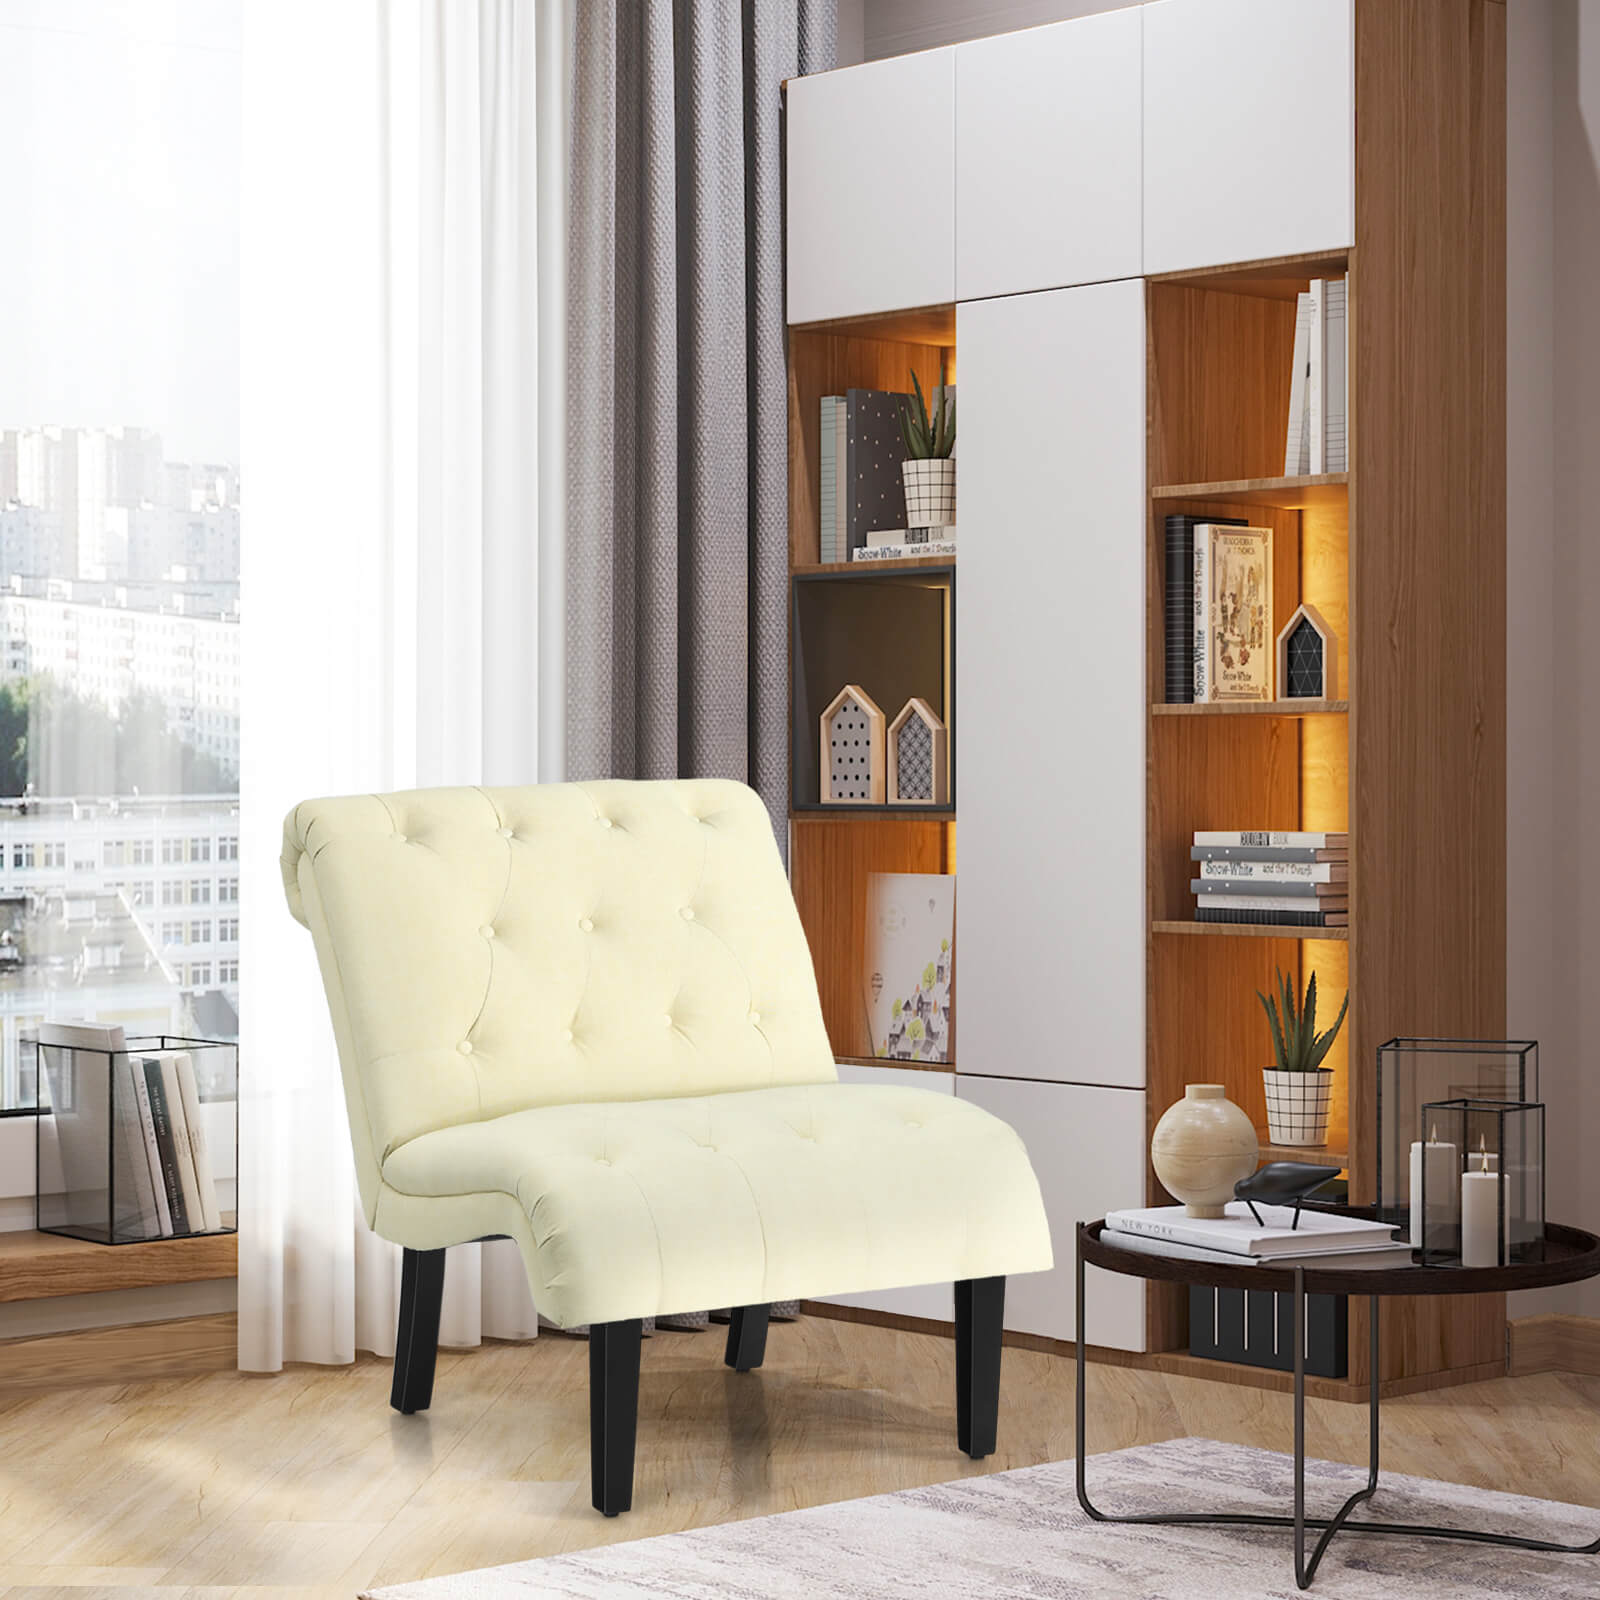 Modern_Upholstered_Accent_Chair_with_Button_Tufted_Linen_Fabric_Beige-6.jpg